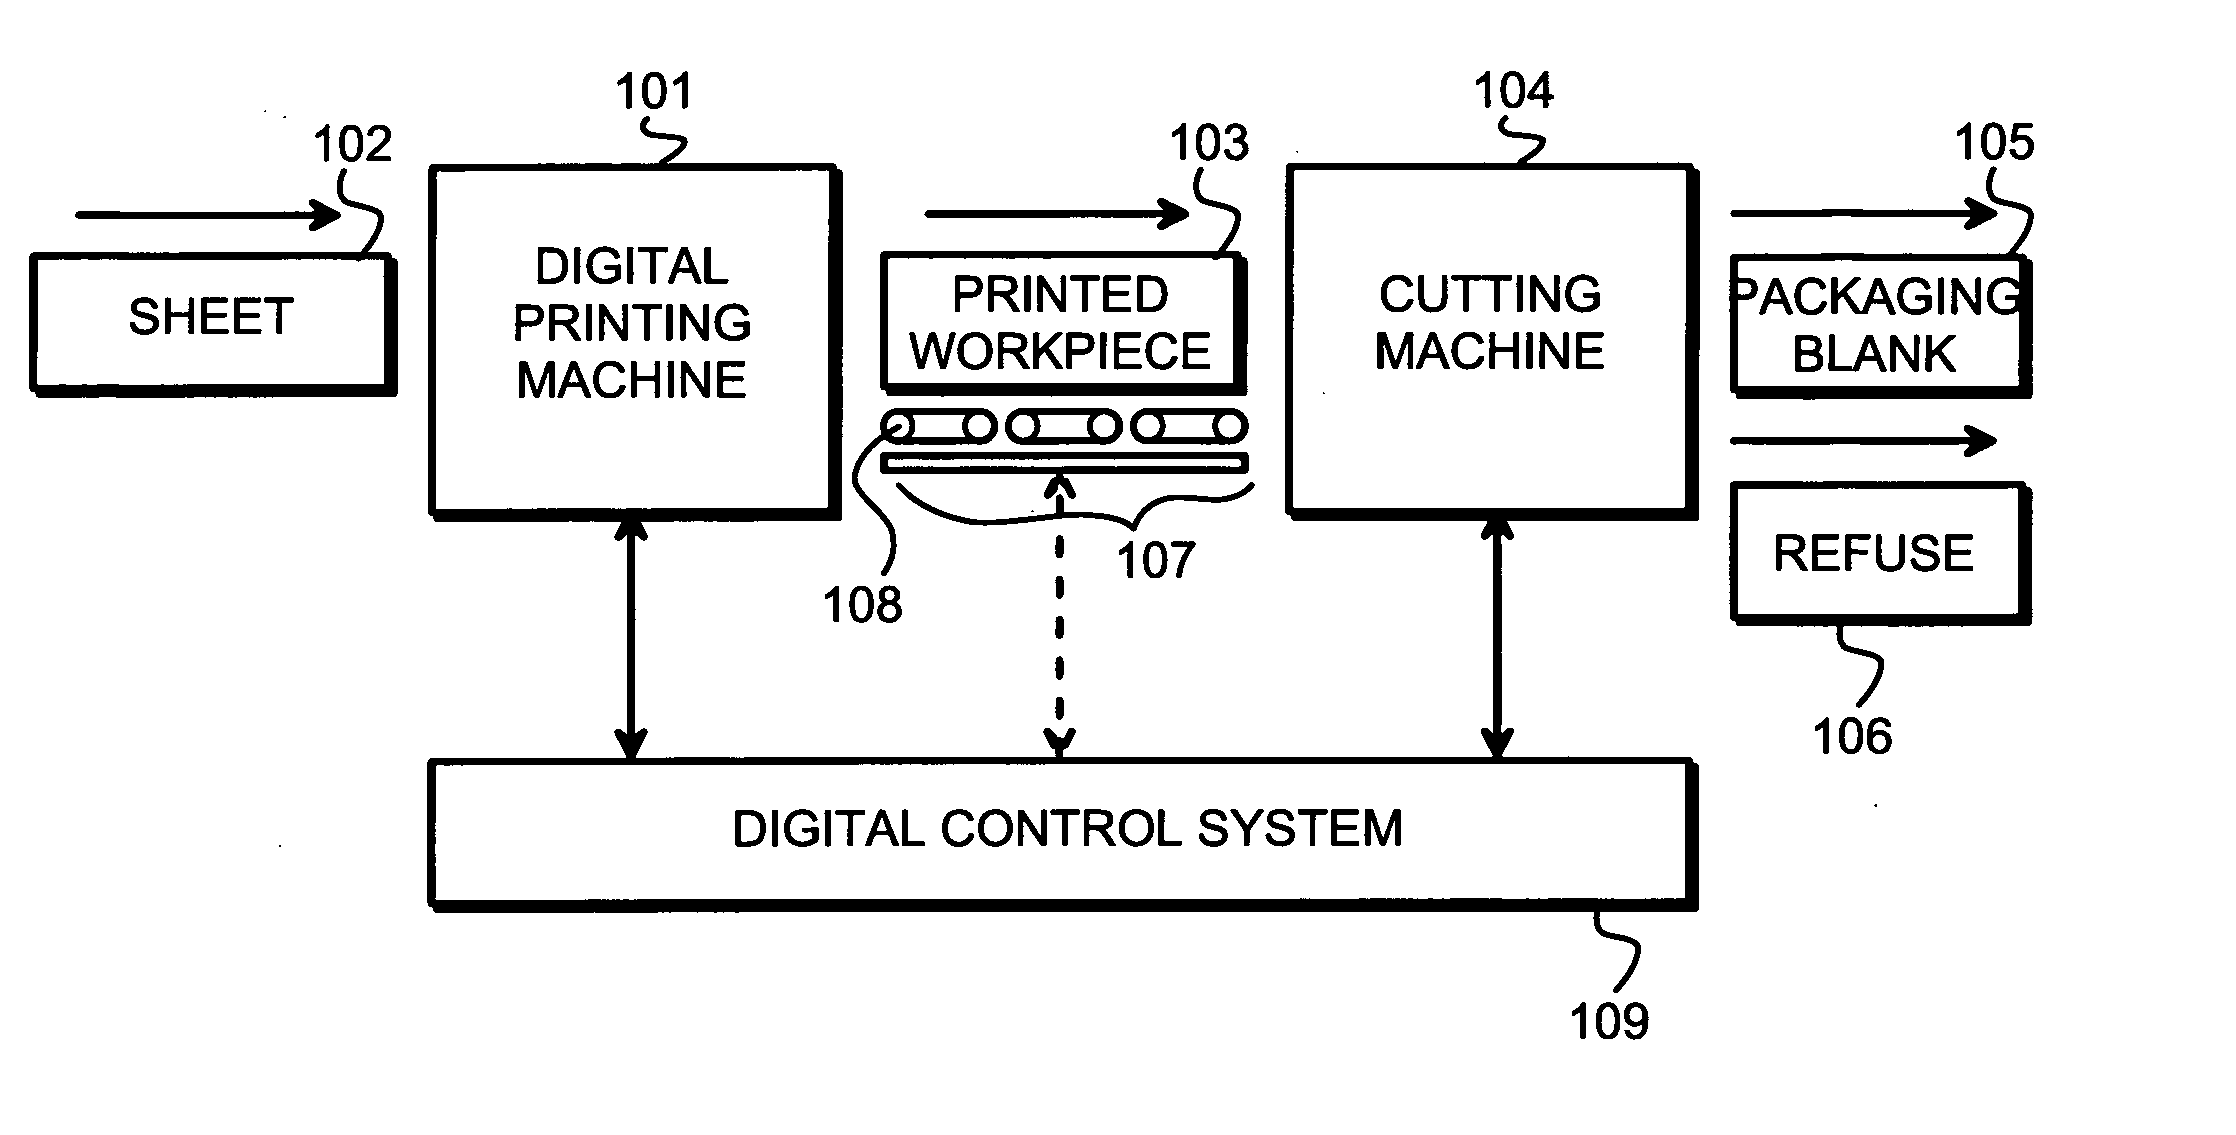 Method and arrangement for manufacturing packages in a digitally controlled process